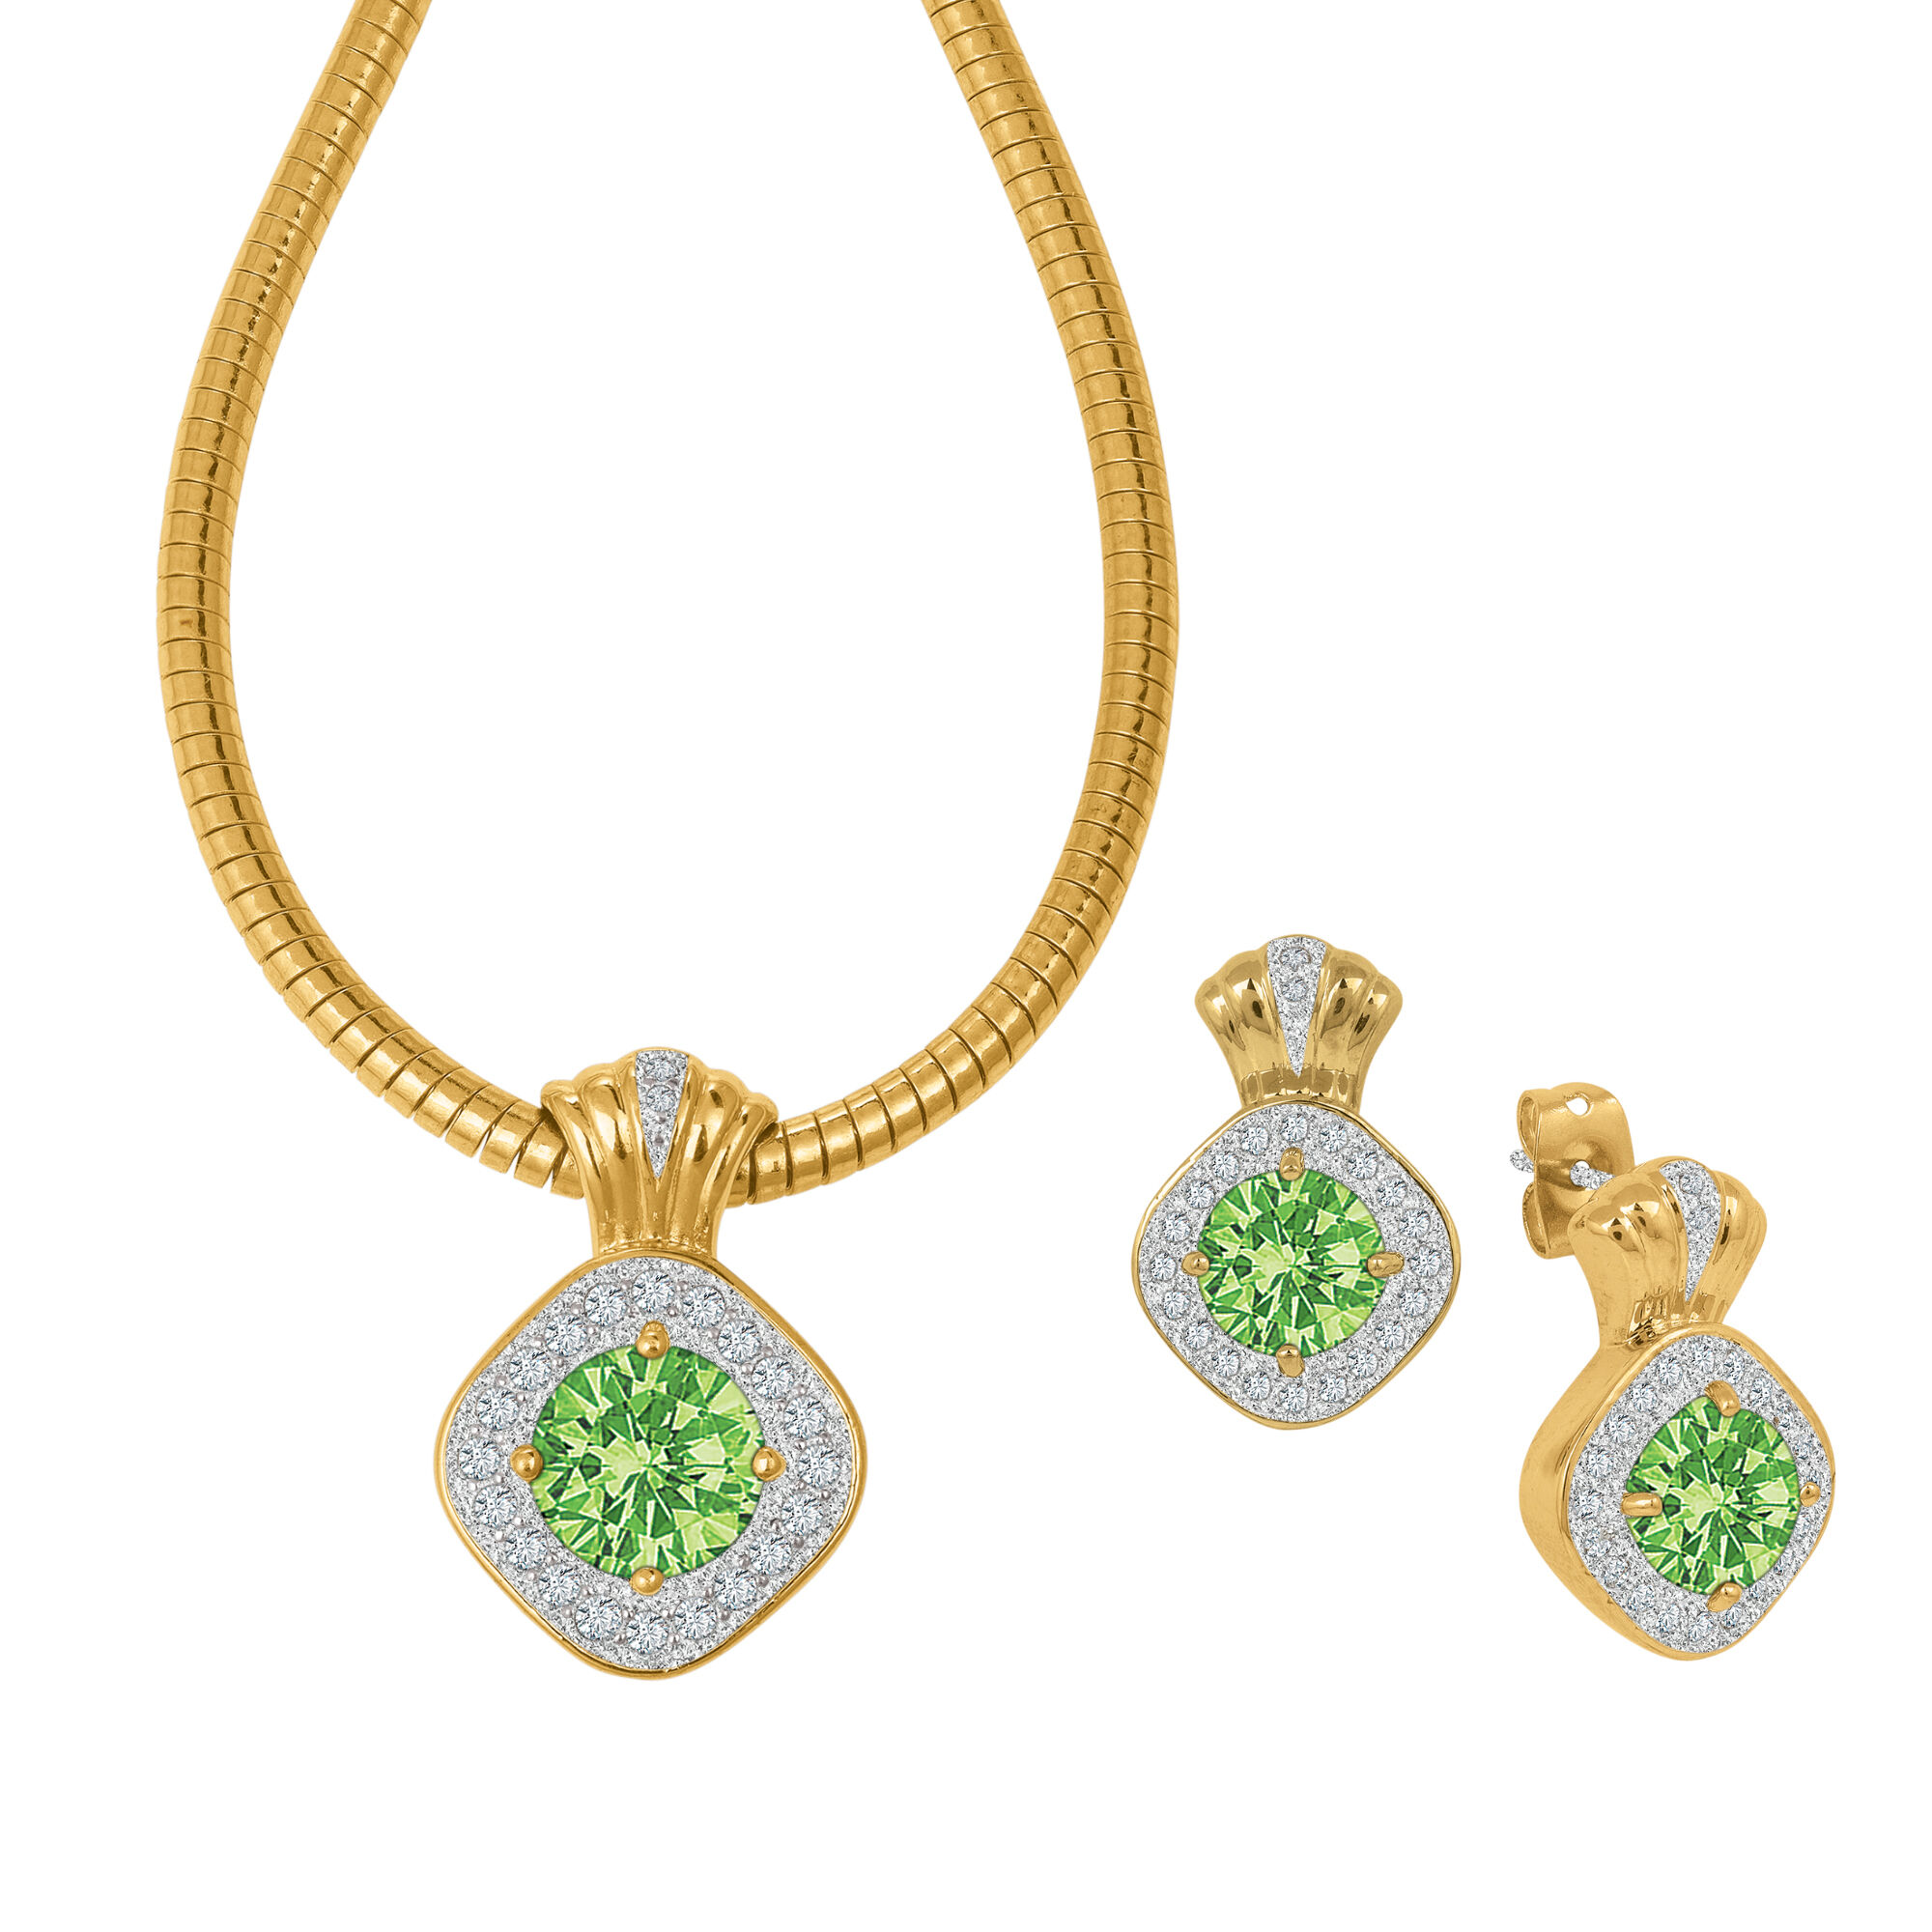 Birthstone Necklace Earring Set 10787 0016 h august